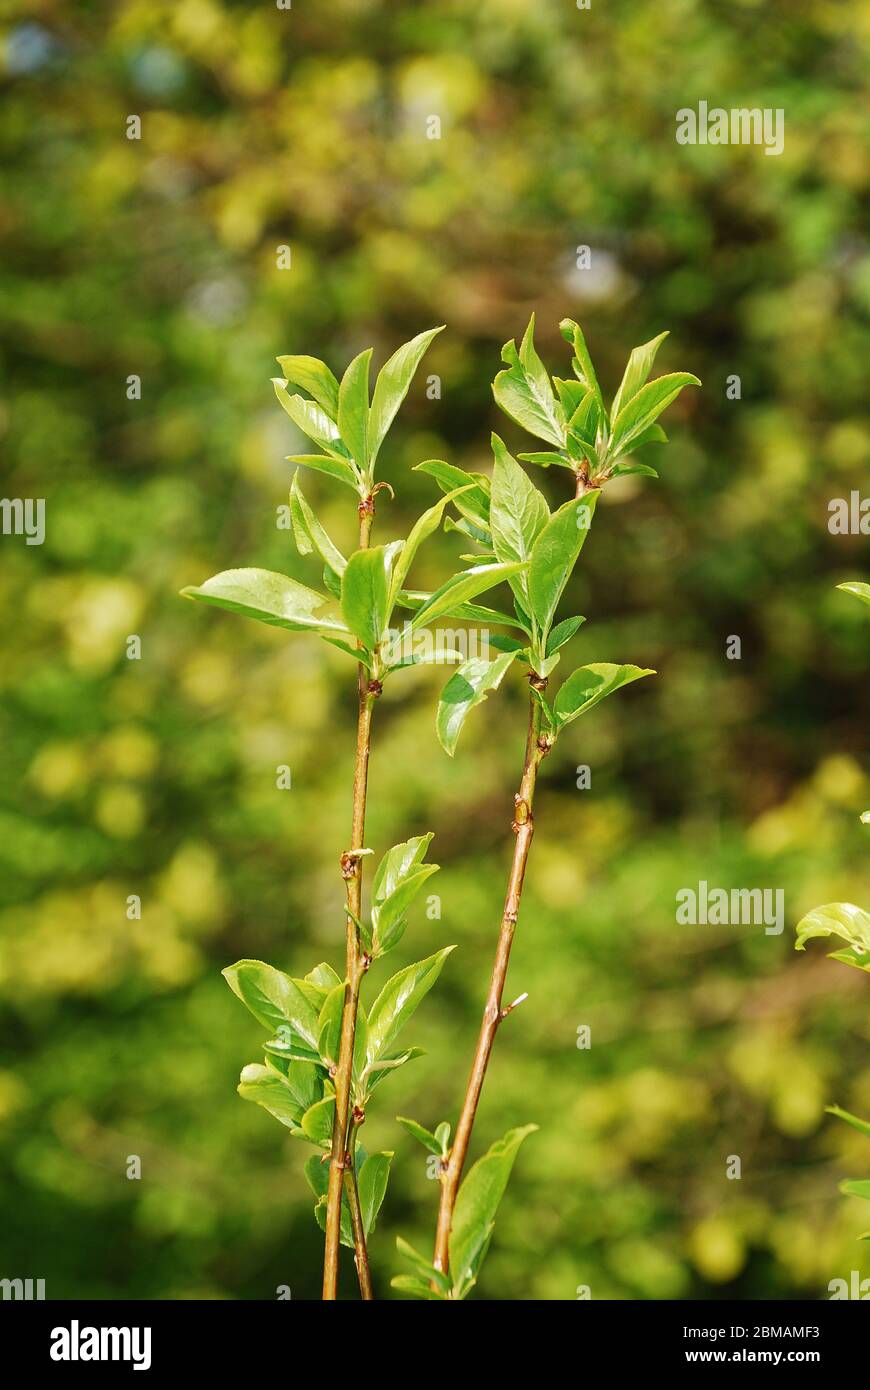 The young leaves growing on an Angelino Plum tree (Prunus Salicina Lindl.) in spring (mid April) Stock Photo